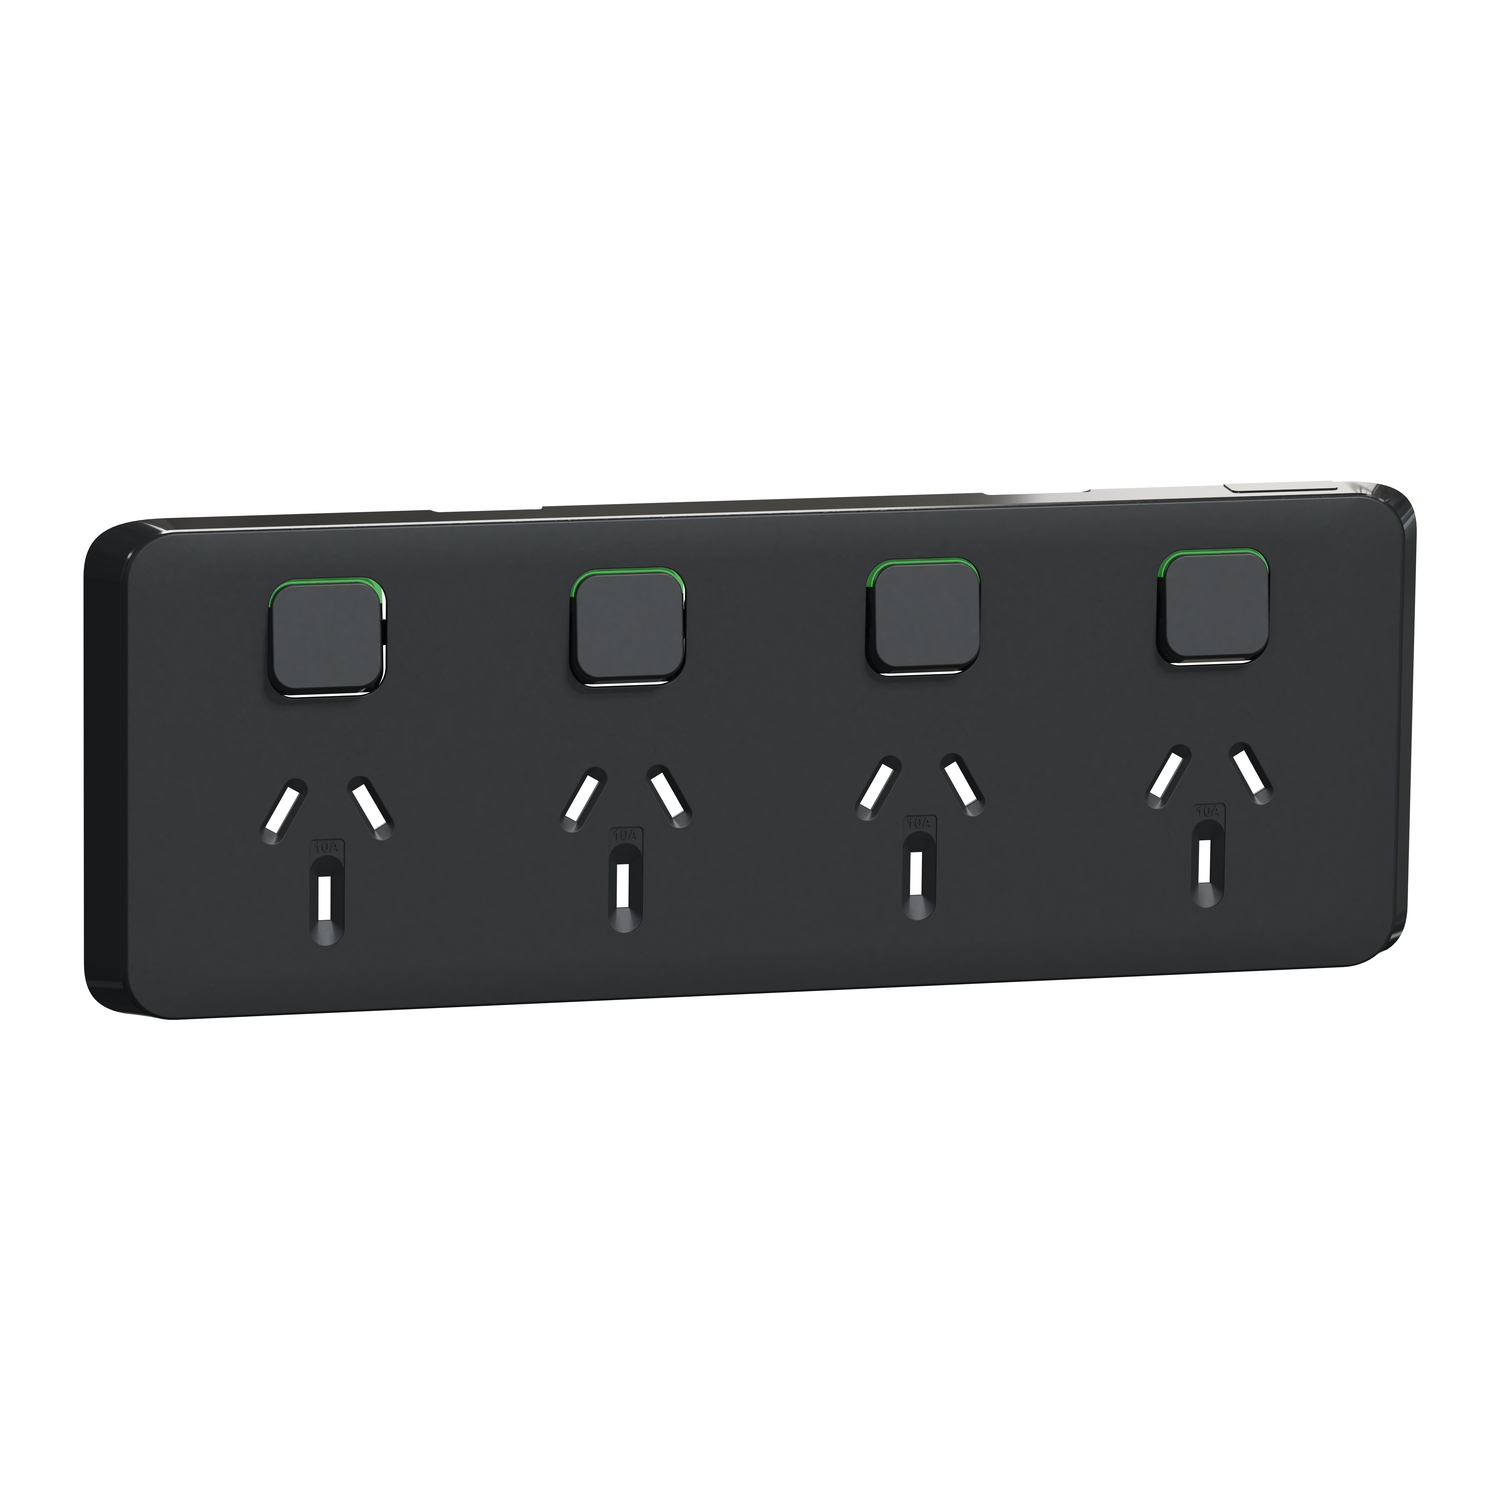 PDL Iconic - Cover Plate Quad Switched Socket 10A Horizontal - Solid Black